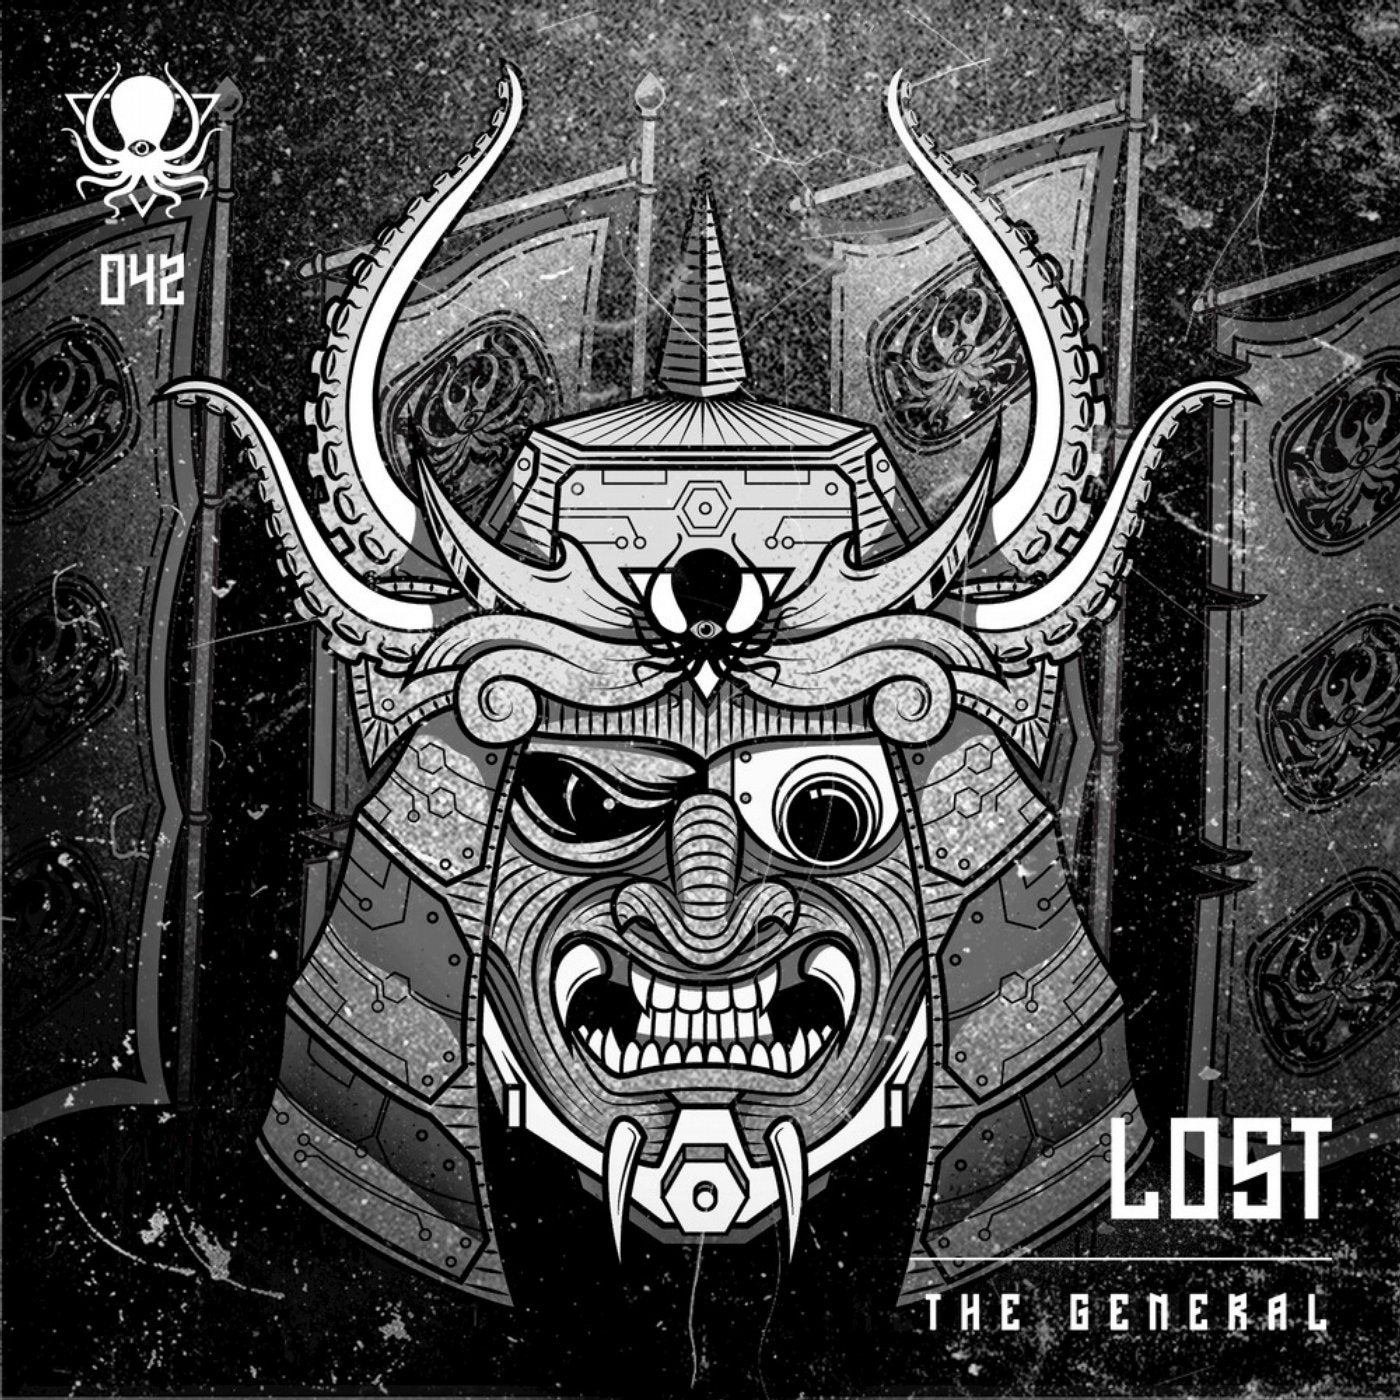 The General - EP